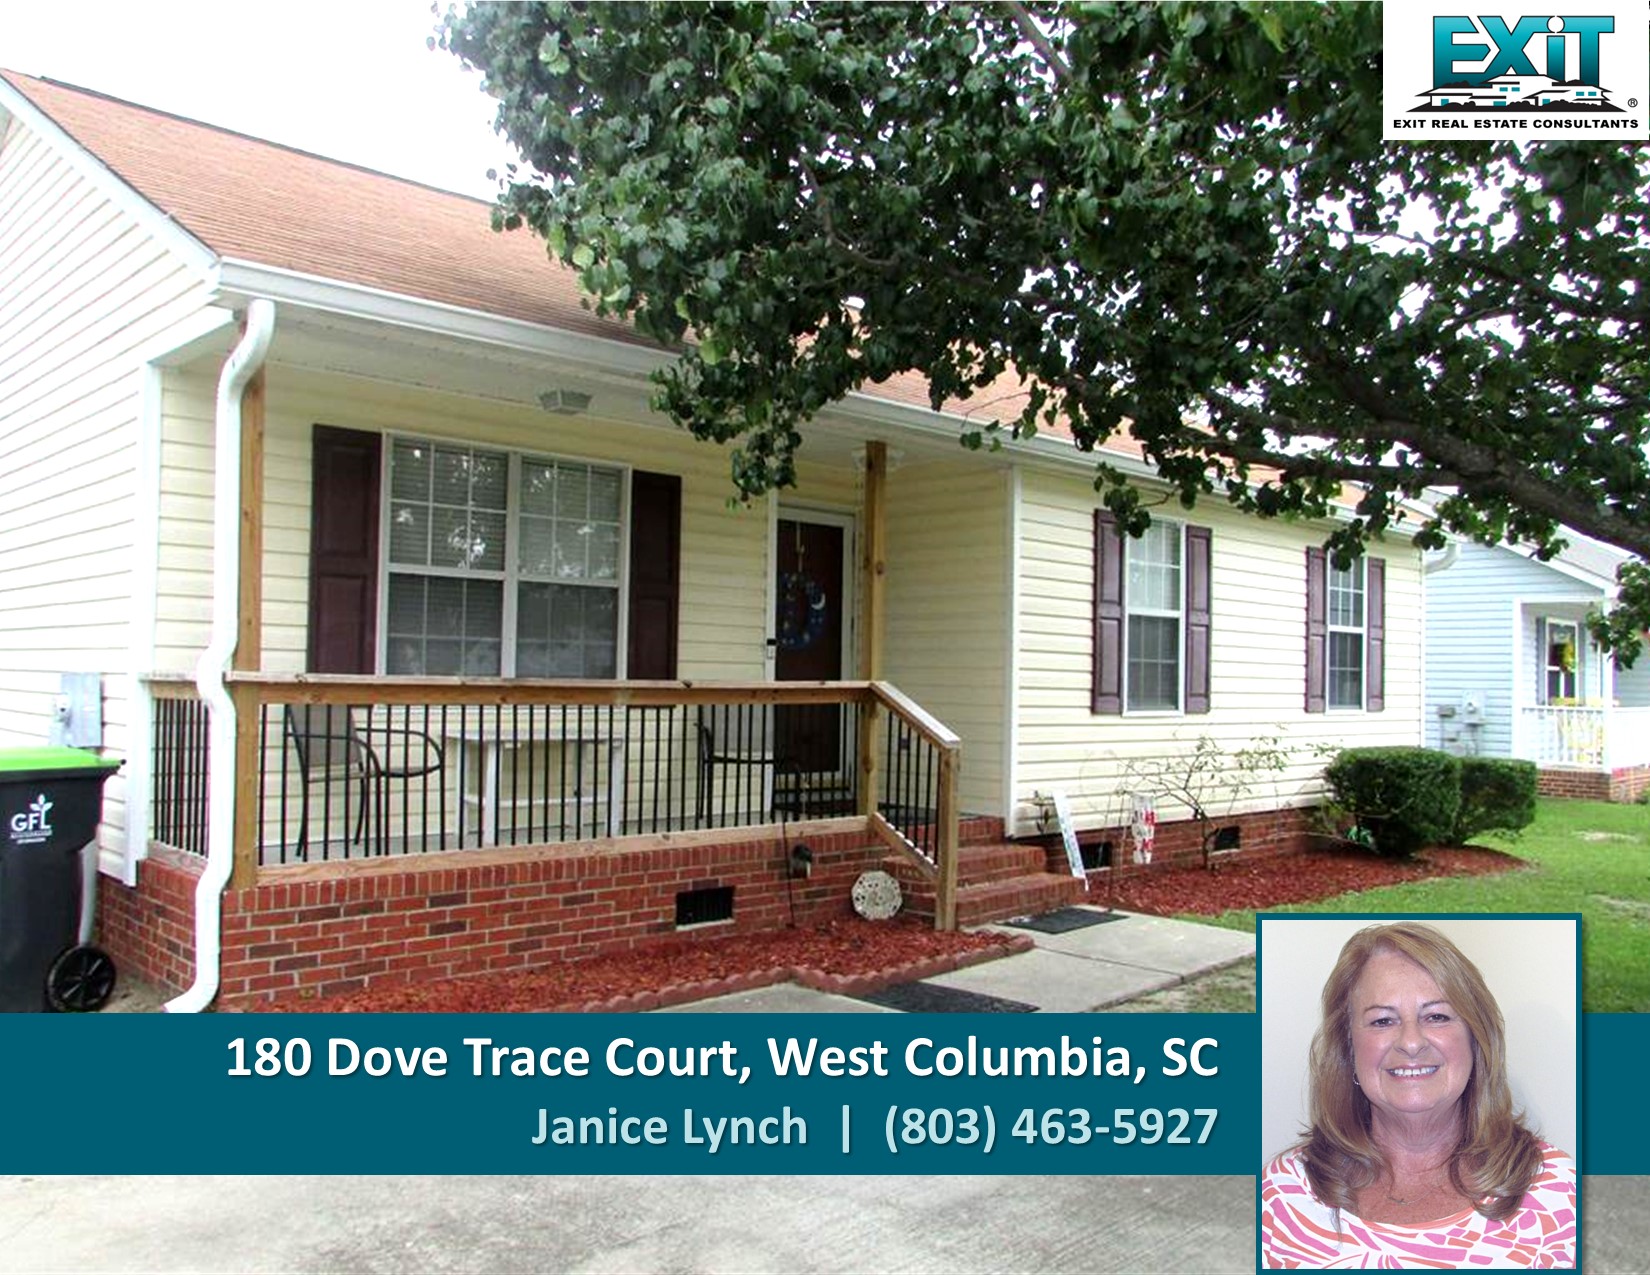 Just listed in Dove Trace - West Columbia